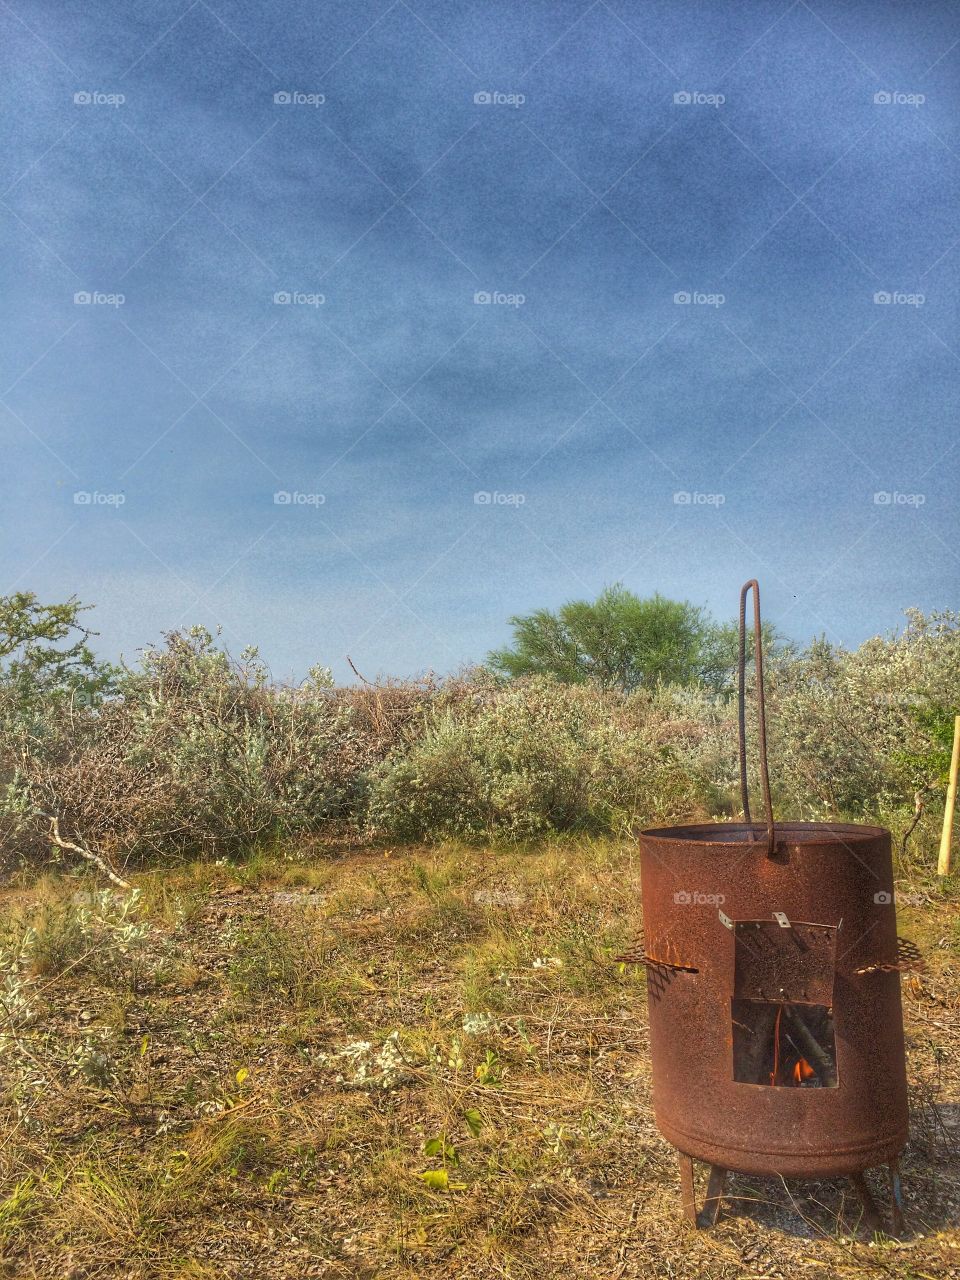 A rusty little barrel with a small fire within sits in a grassy clearing. Desert shrubs lie behind it. A blue sky is overhead with some wispy clouds spread throughout it. 